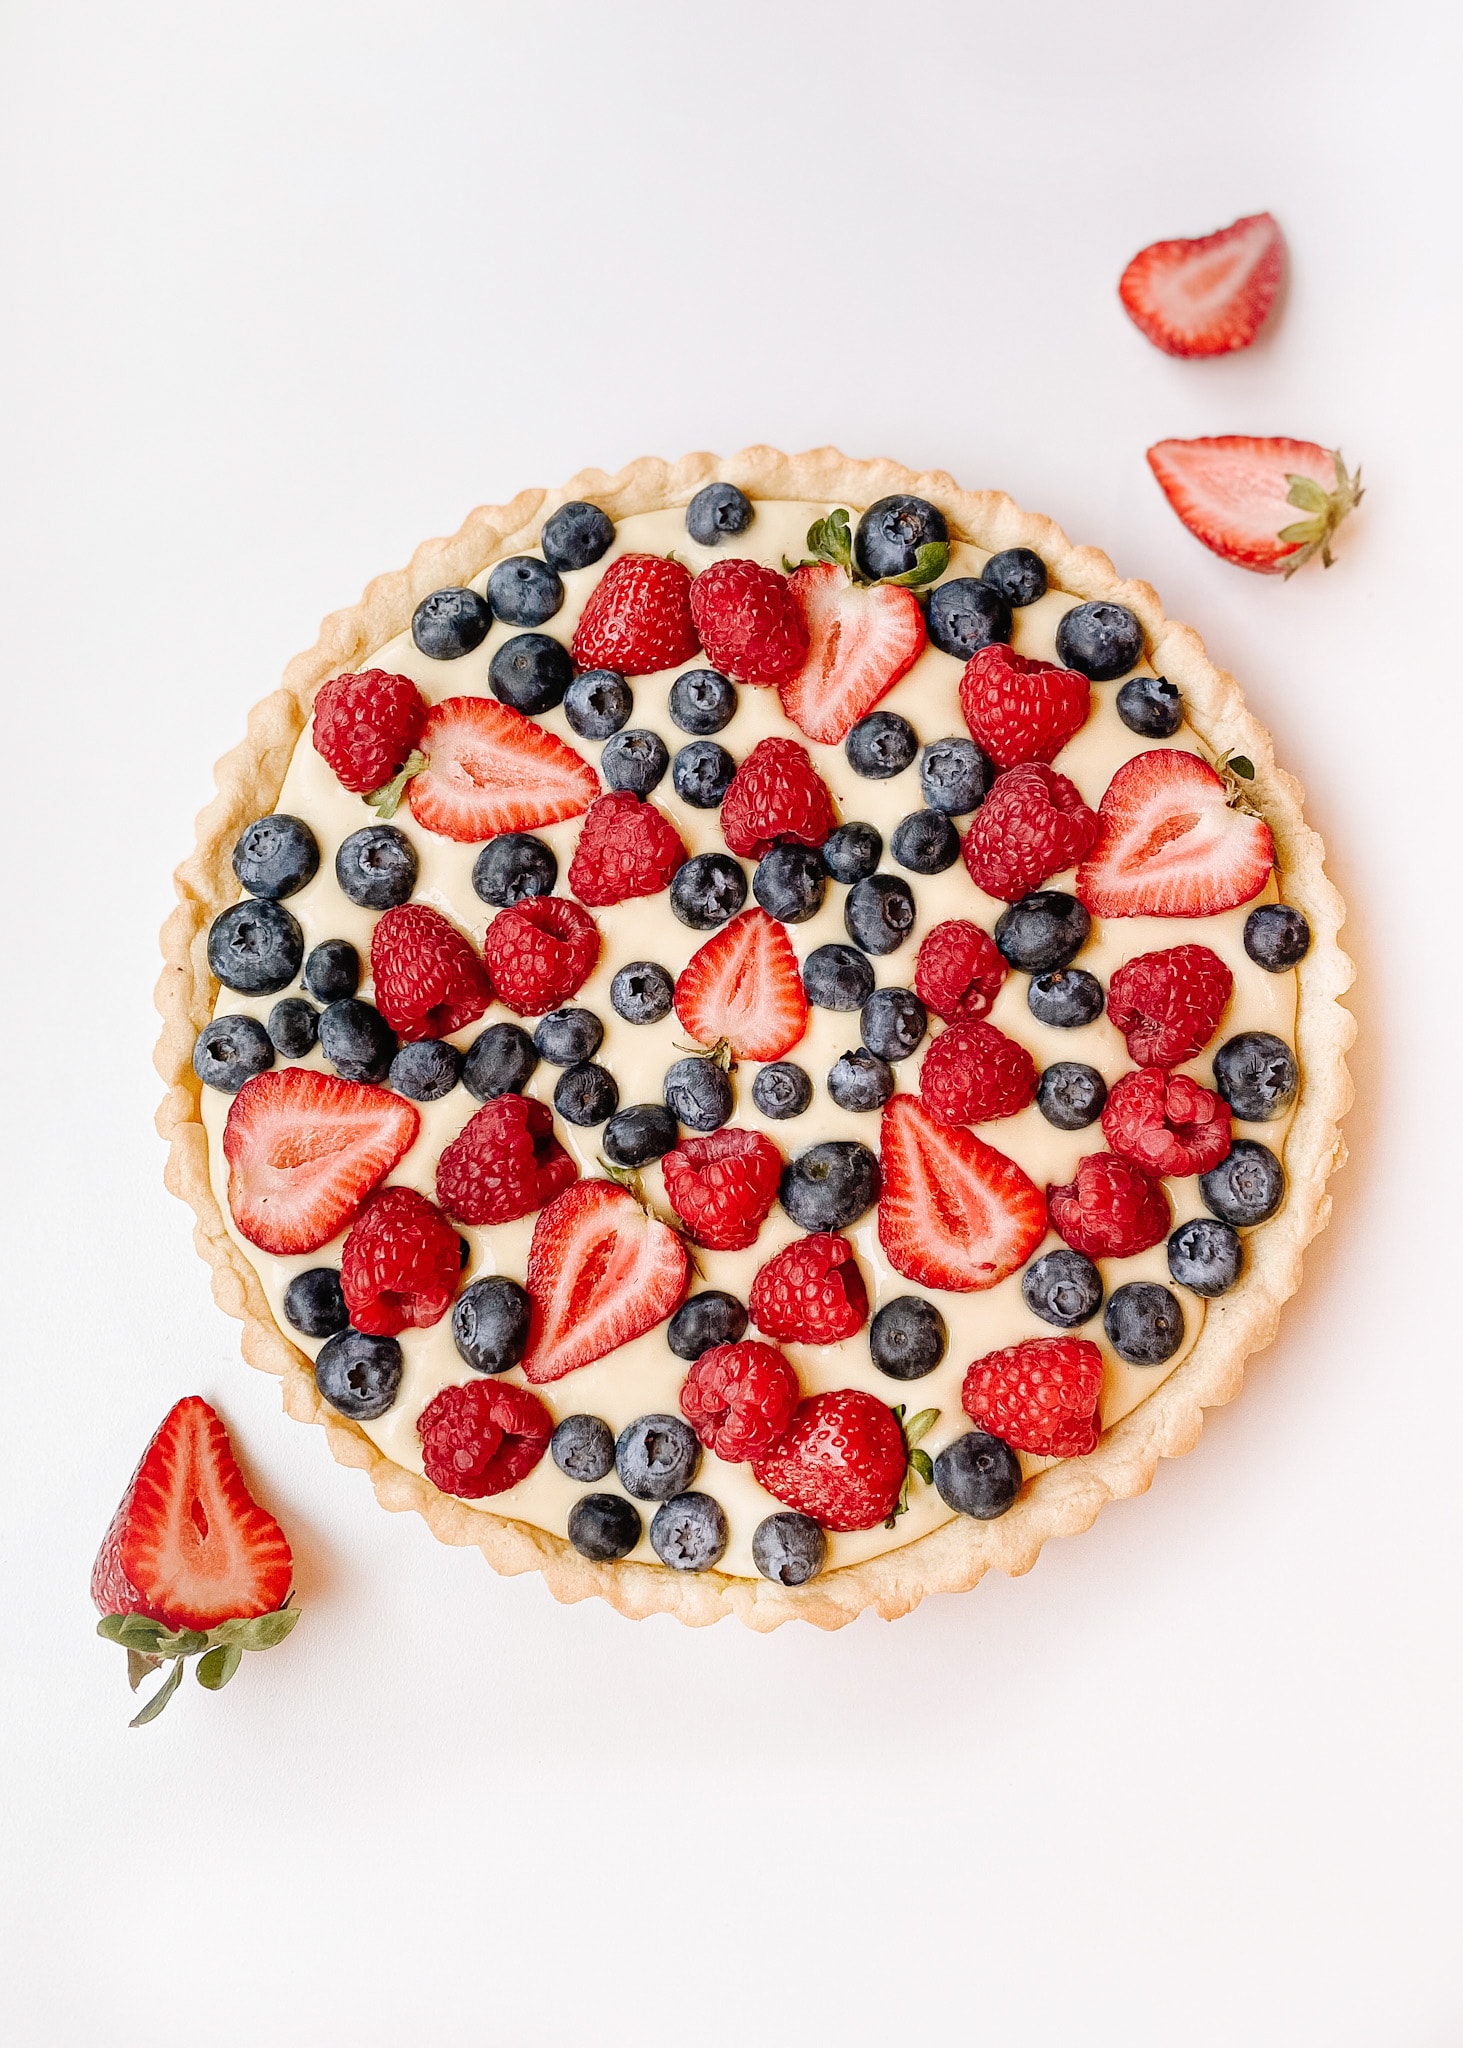 A whole vanilla cream fruit tart photo, shot from above. The top of the fruit tart is topped with blueberries, strawberries, and raspberries.